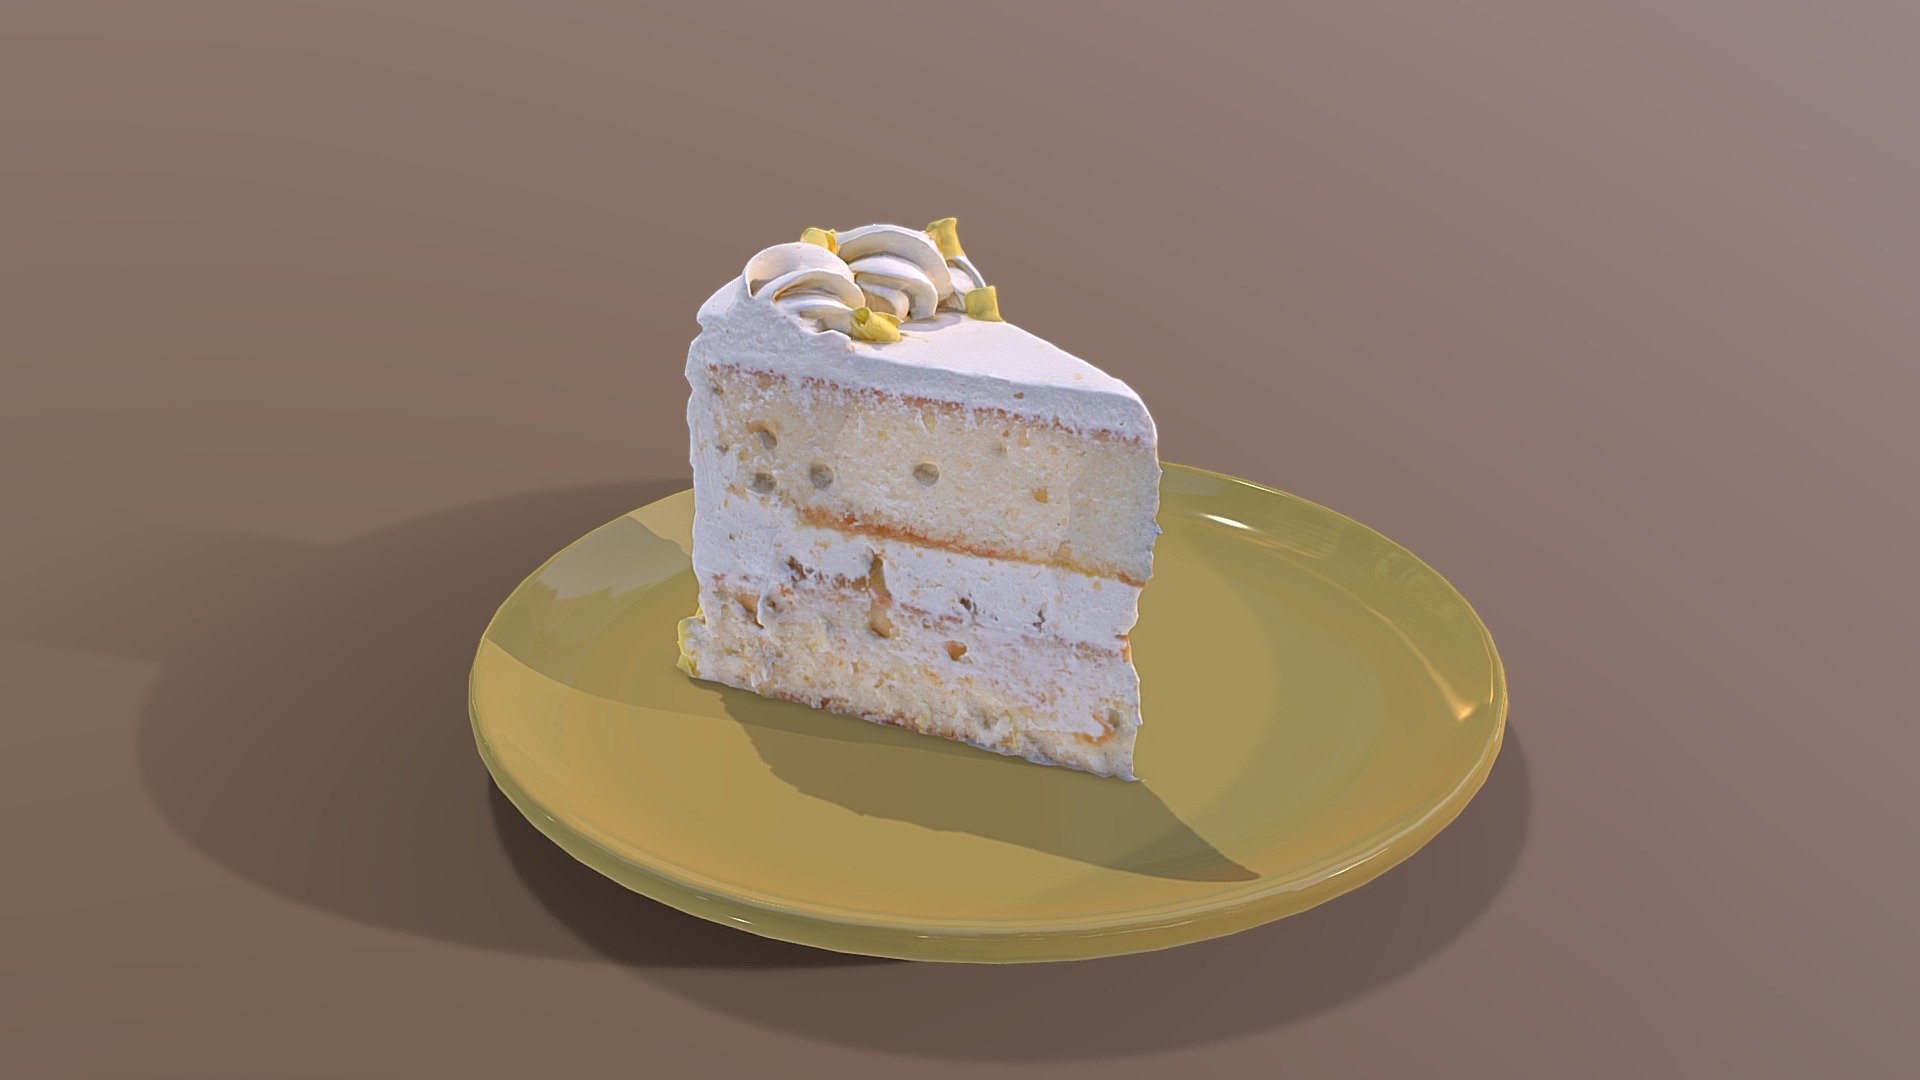 This Delightful Lemon Drizzle Cake, slice was created using photogrammetry which is made by CAKESBURG Premium Cake Shop in the UK. You can purchase real cake from this link: https://cakesburg.co.uk/products/lemon-drizzle-cake?_pos=5&amp;_sid=0979711e3&amp;_ss=r

Cake Textures 4096*4096px PBR photoscan-based materials (Base Color, Normal, Roughness, Specular, AO)

Click here for the cut version.

Click here for the uncut version 3d model